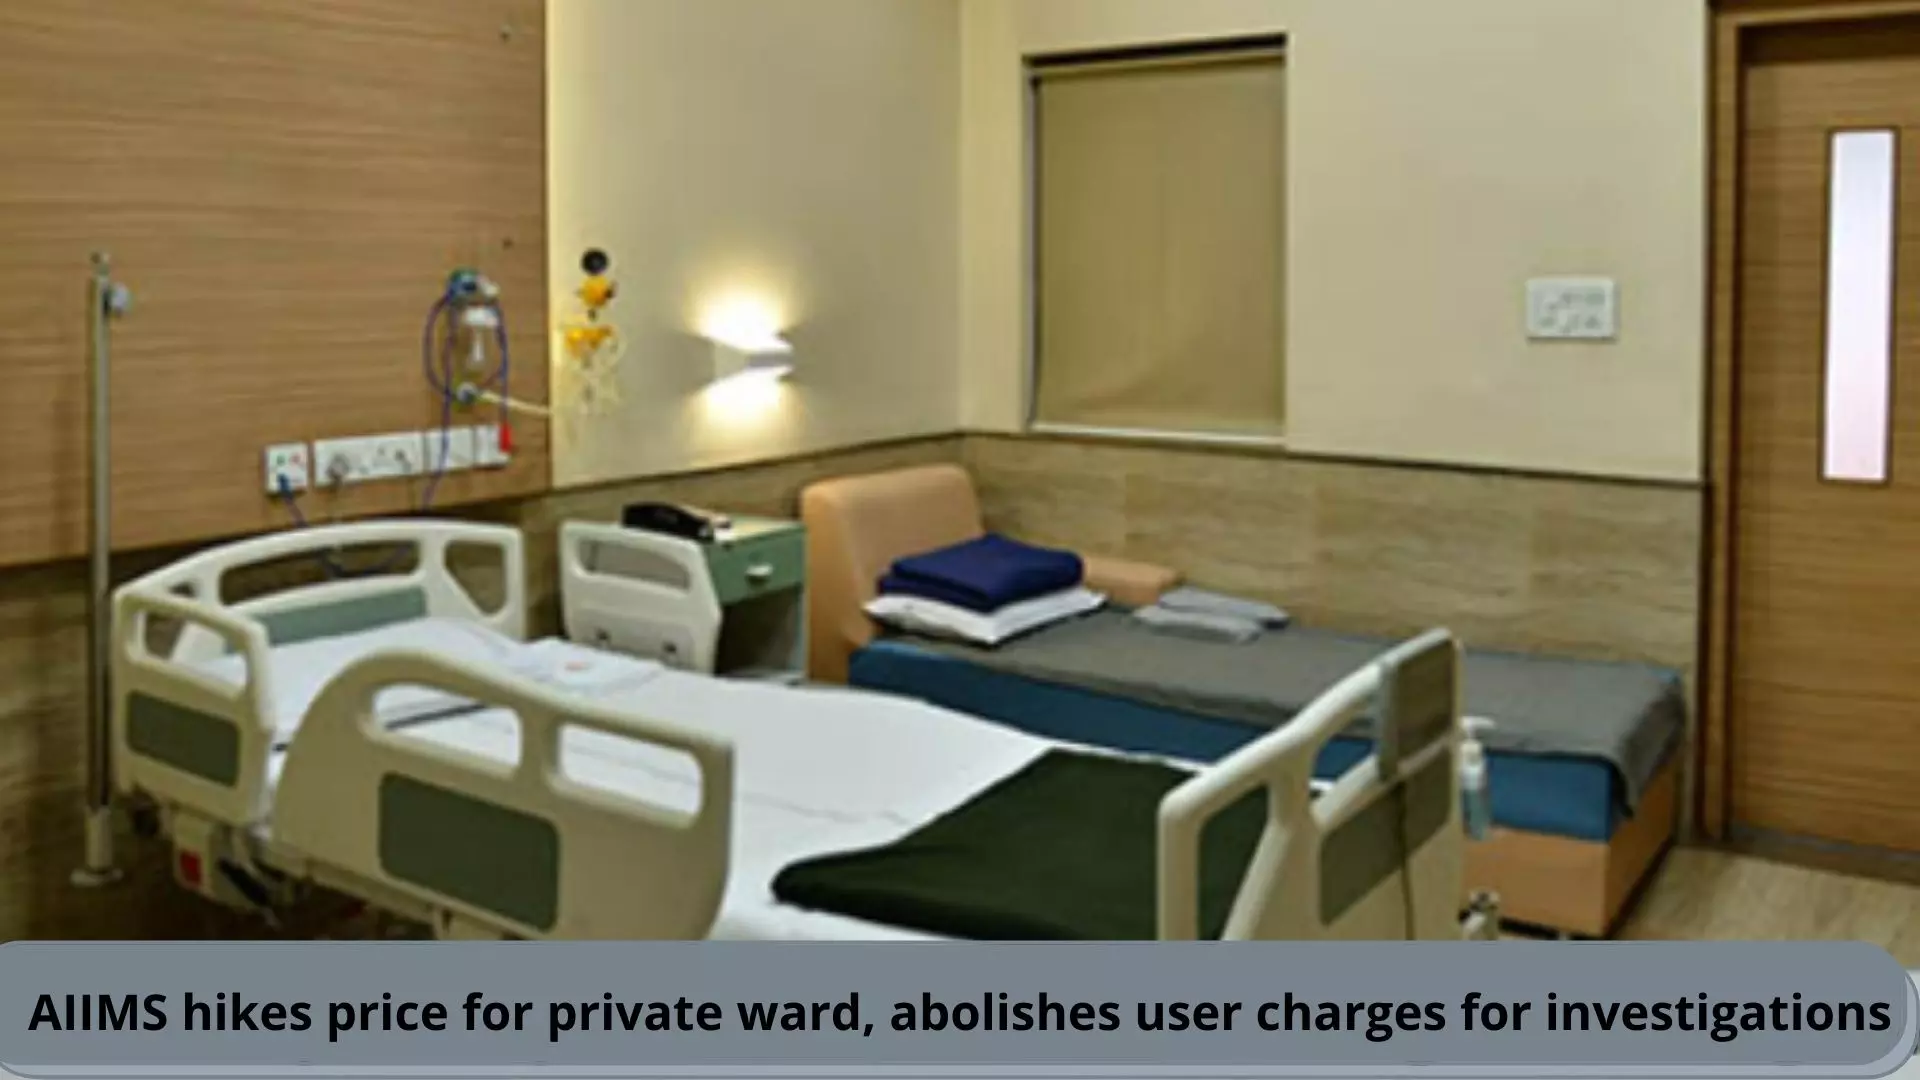 AIIMS New Delhi hikes price for private ward, abolishes investigations charges